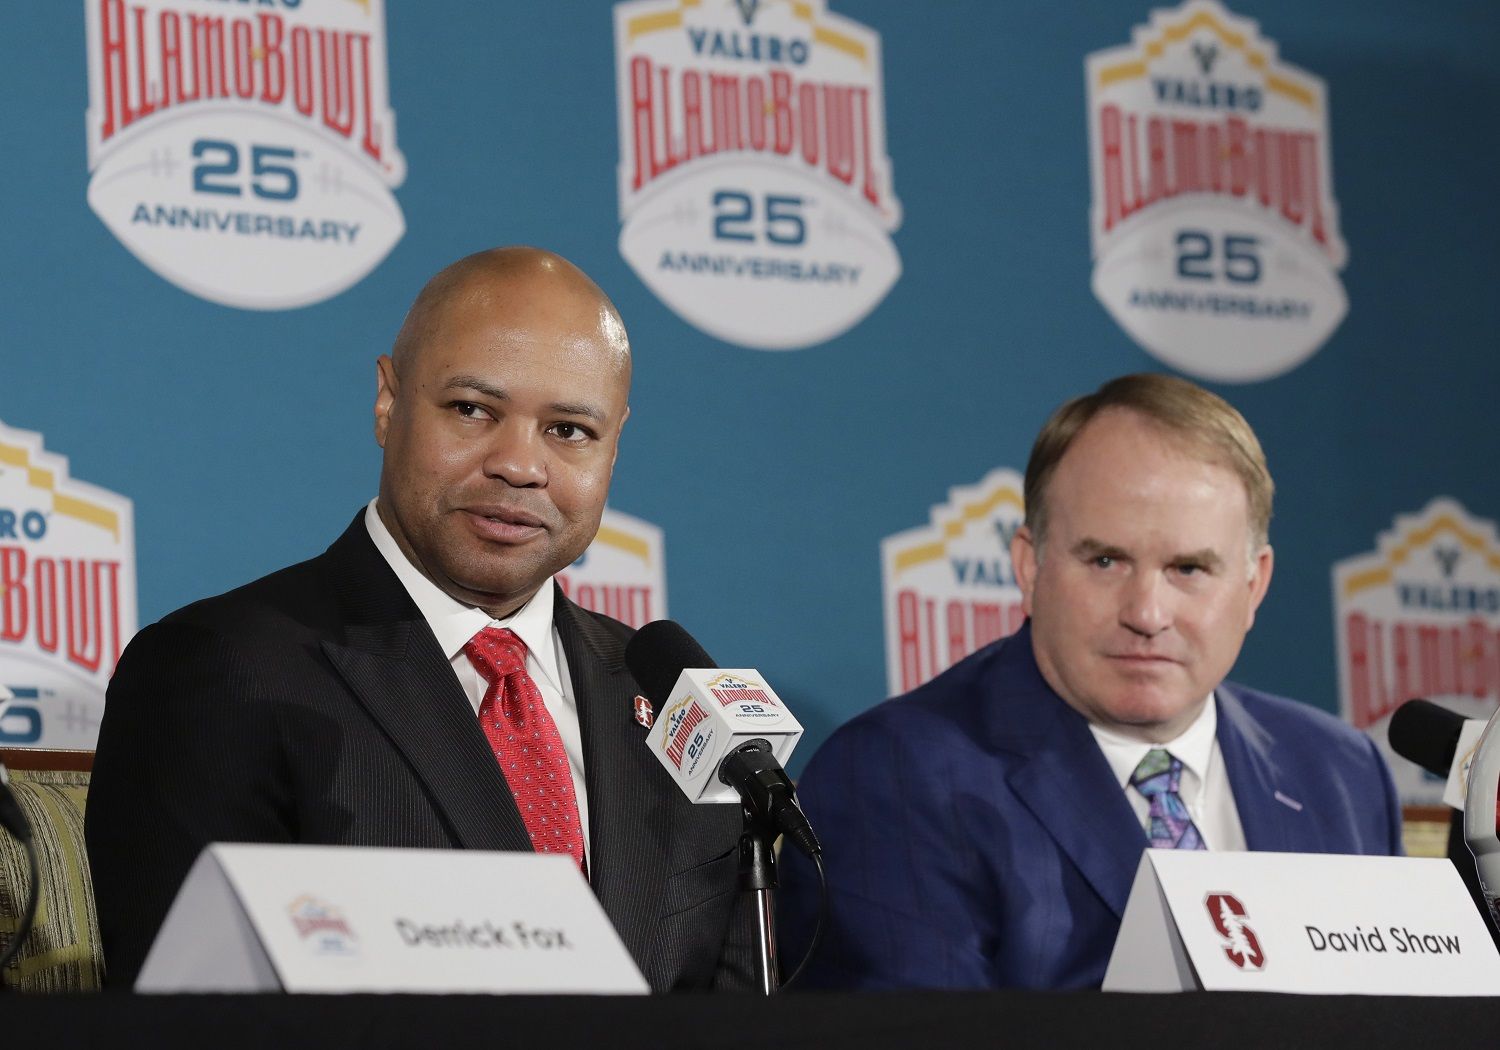 Stanford head coach David Shaw, left, and TCU head coach Gary Patterson, right, take part in a news conference for the Alamo Bowl NCAA college football game, Thursday, Dec. 7, 2017, in San Antonio. TCU and Stanford will play in the Alamo Bowl on Dec. 28. (AP Photo/Eric Gay)